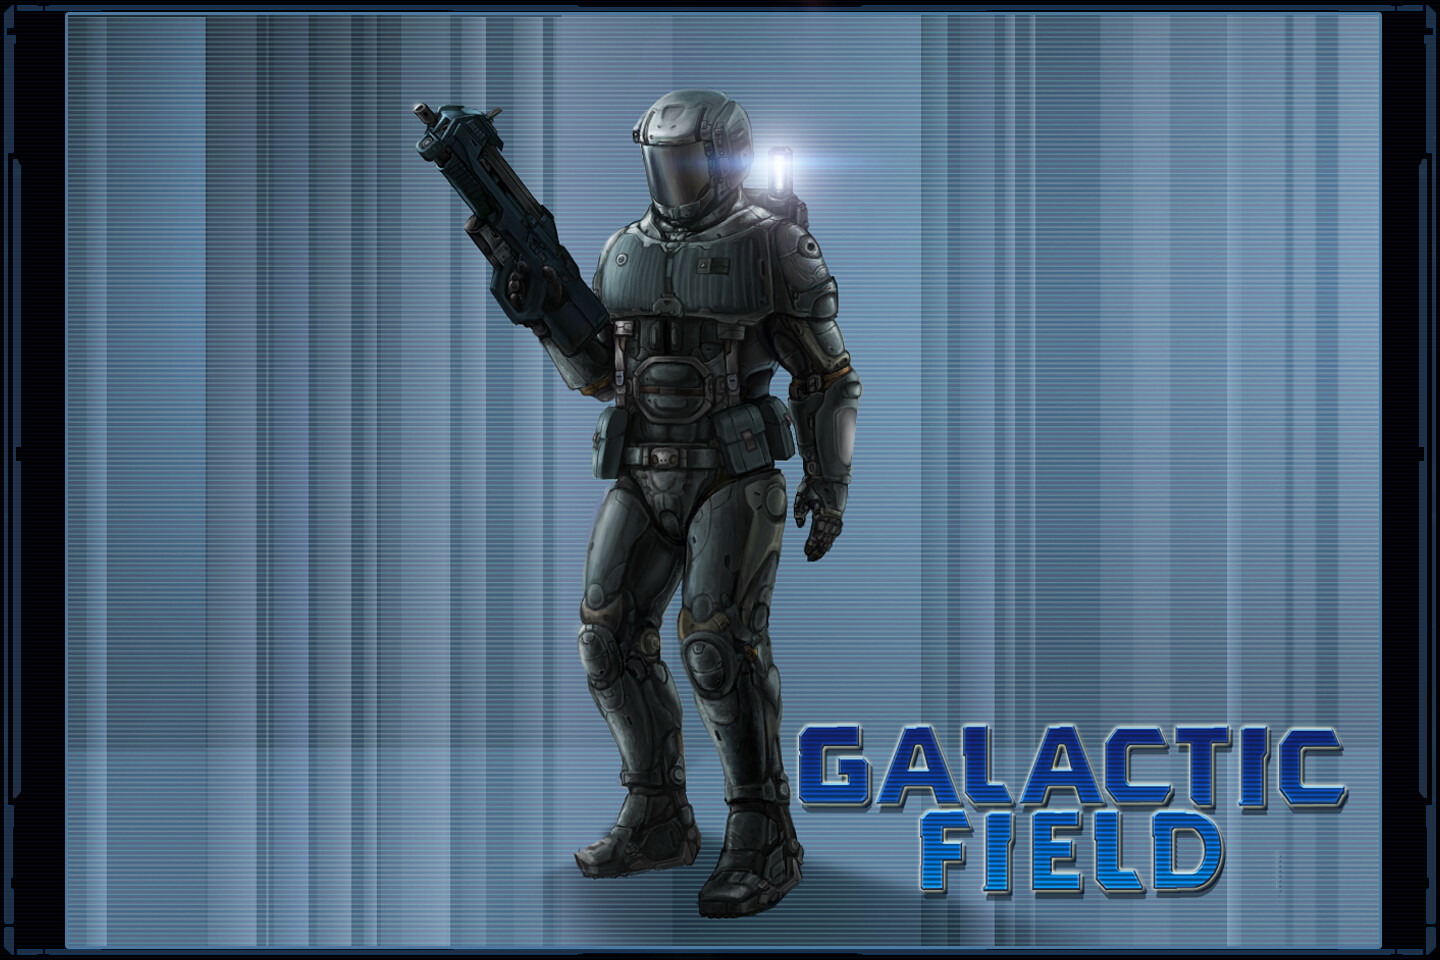 Galactic Force on Steam